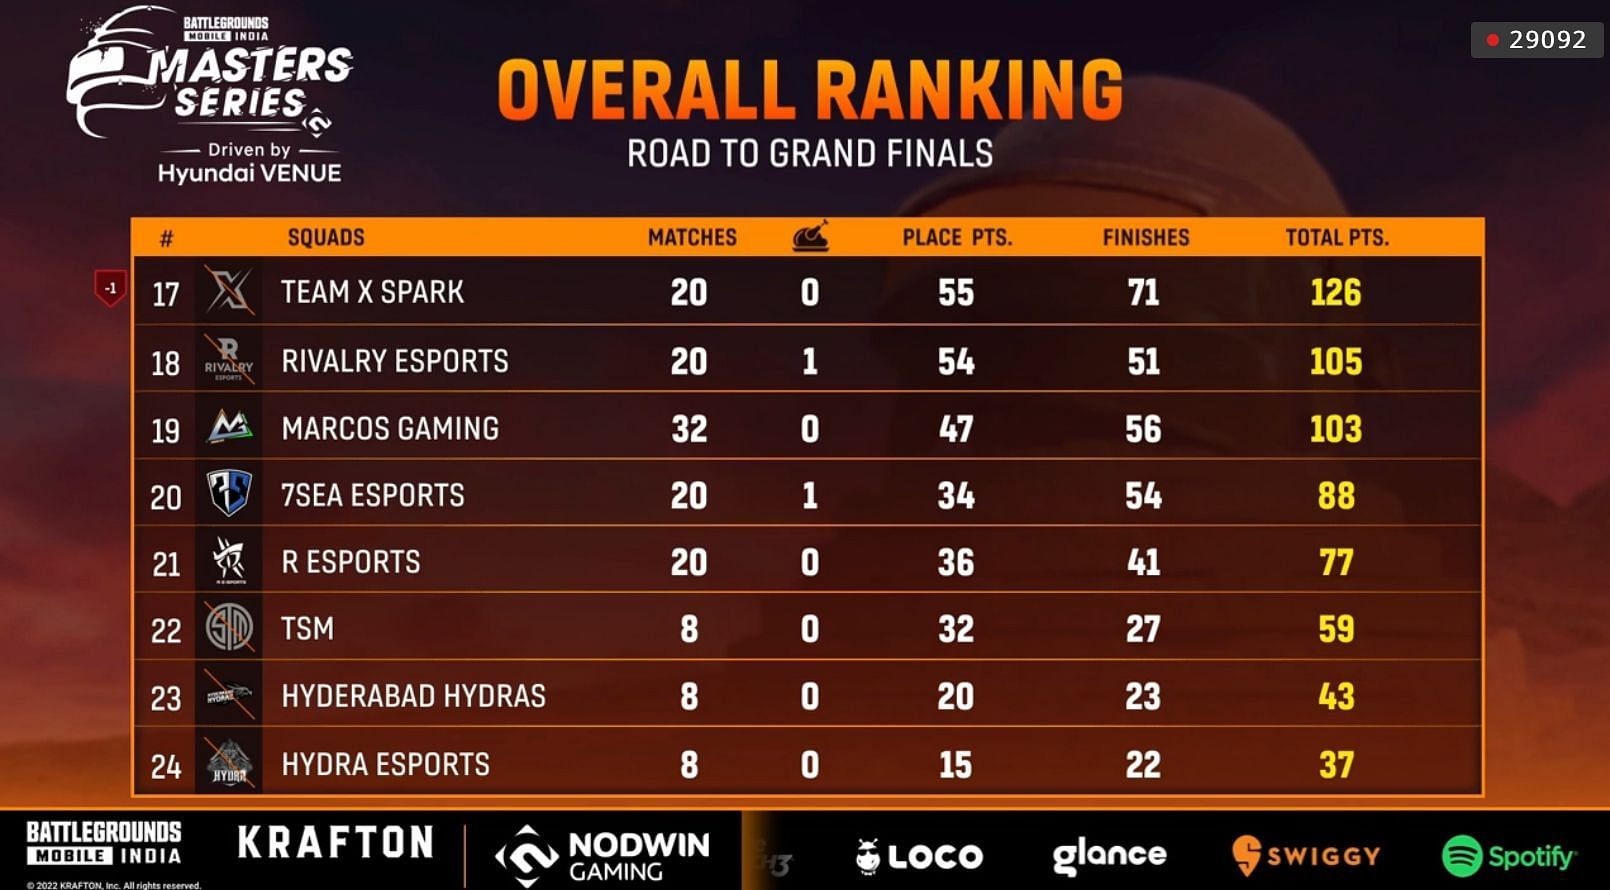 The bottom eight teams were unable to secure their tickets for BGMI Masters Series Grand Finals (Image via Loco)